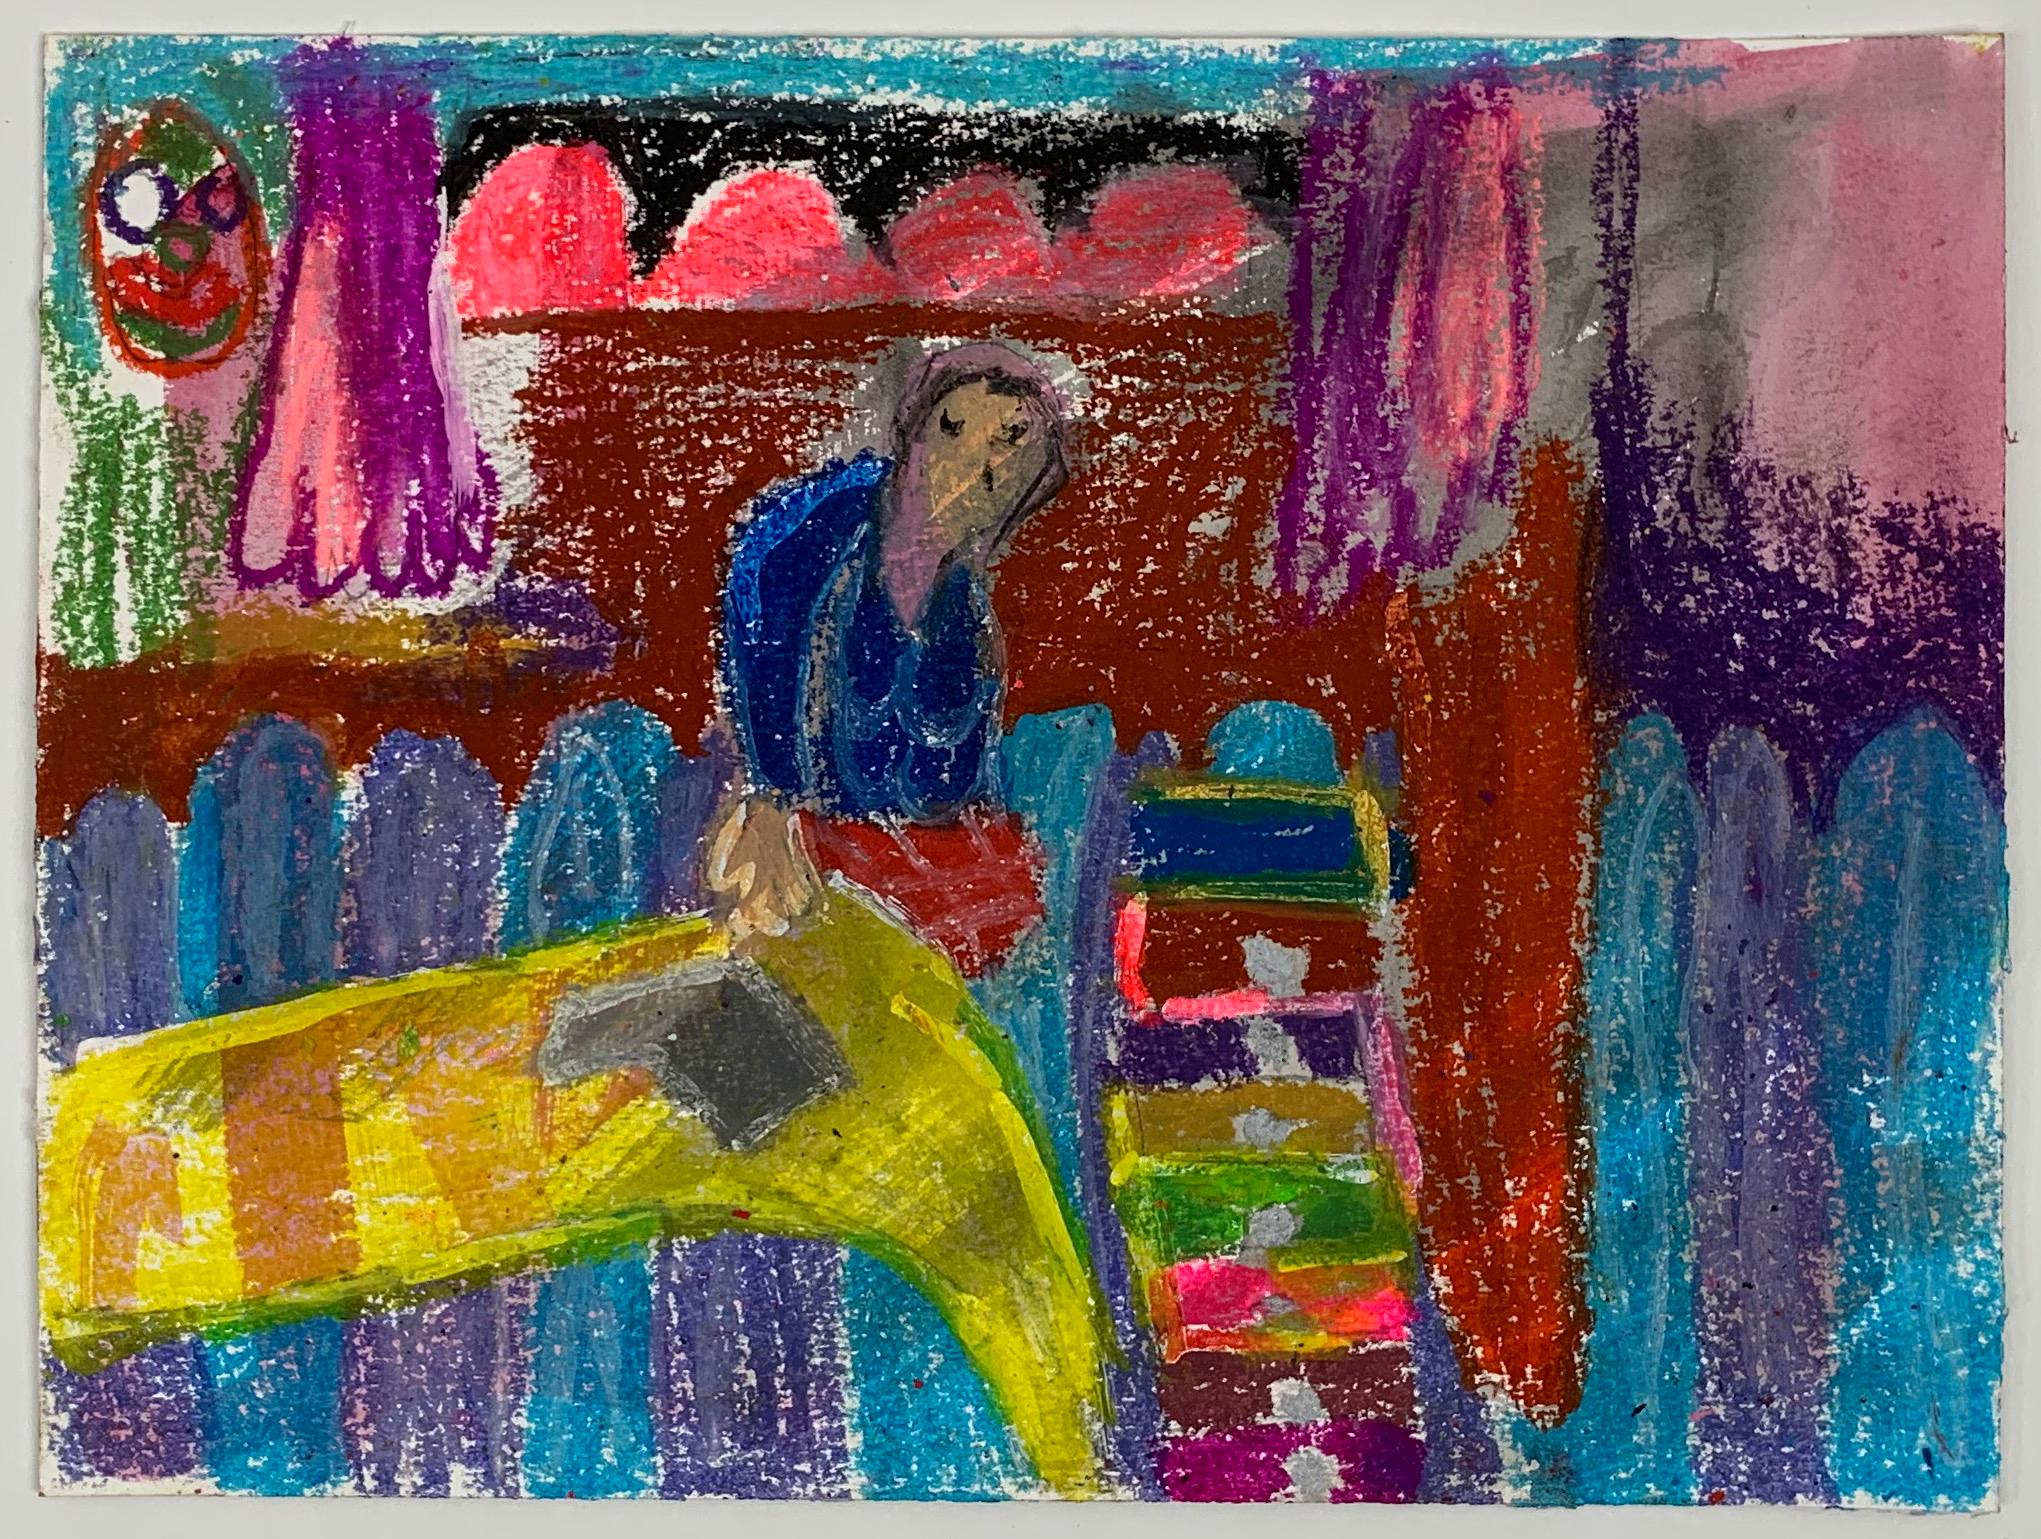 A colorful self-portrait oil pastel drawing of the artist reading in bed. 

Tanja Ritterbex has been called the Lady Gaga of contemporary art. She makes bolds paintings, videos (vlog's), and performances about her daily life and thoughts as a woman